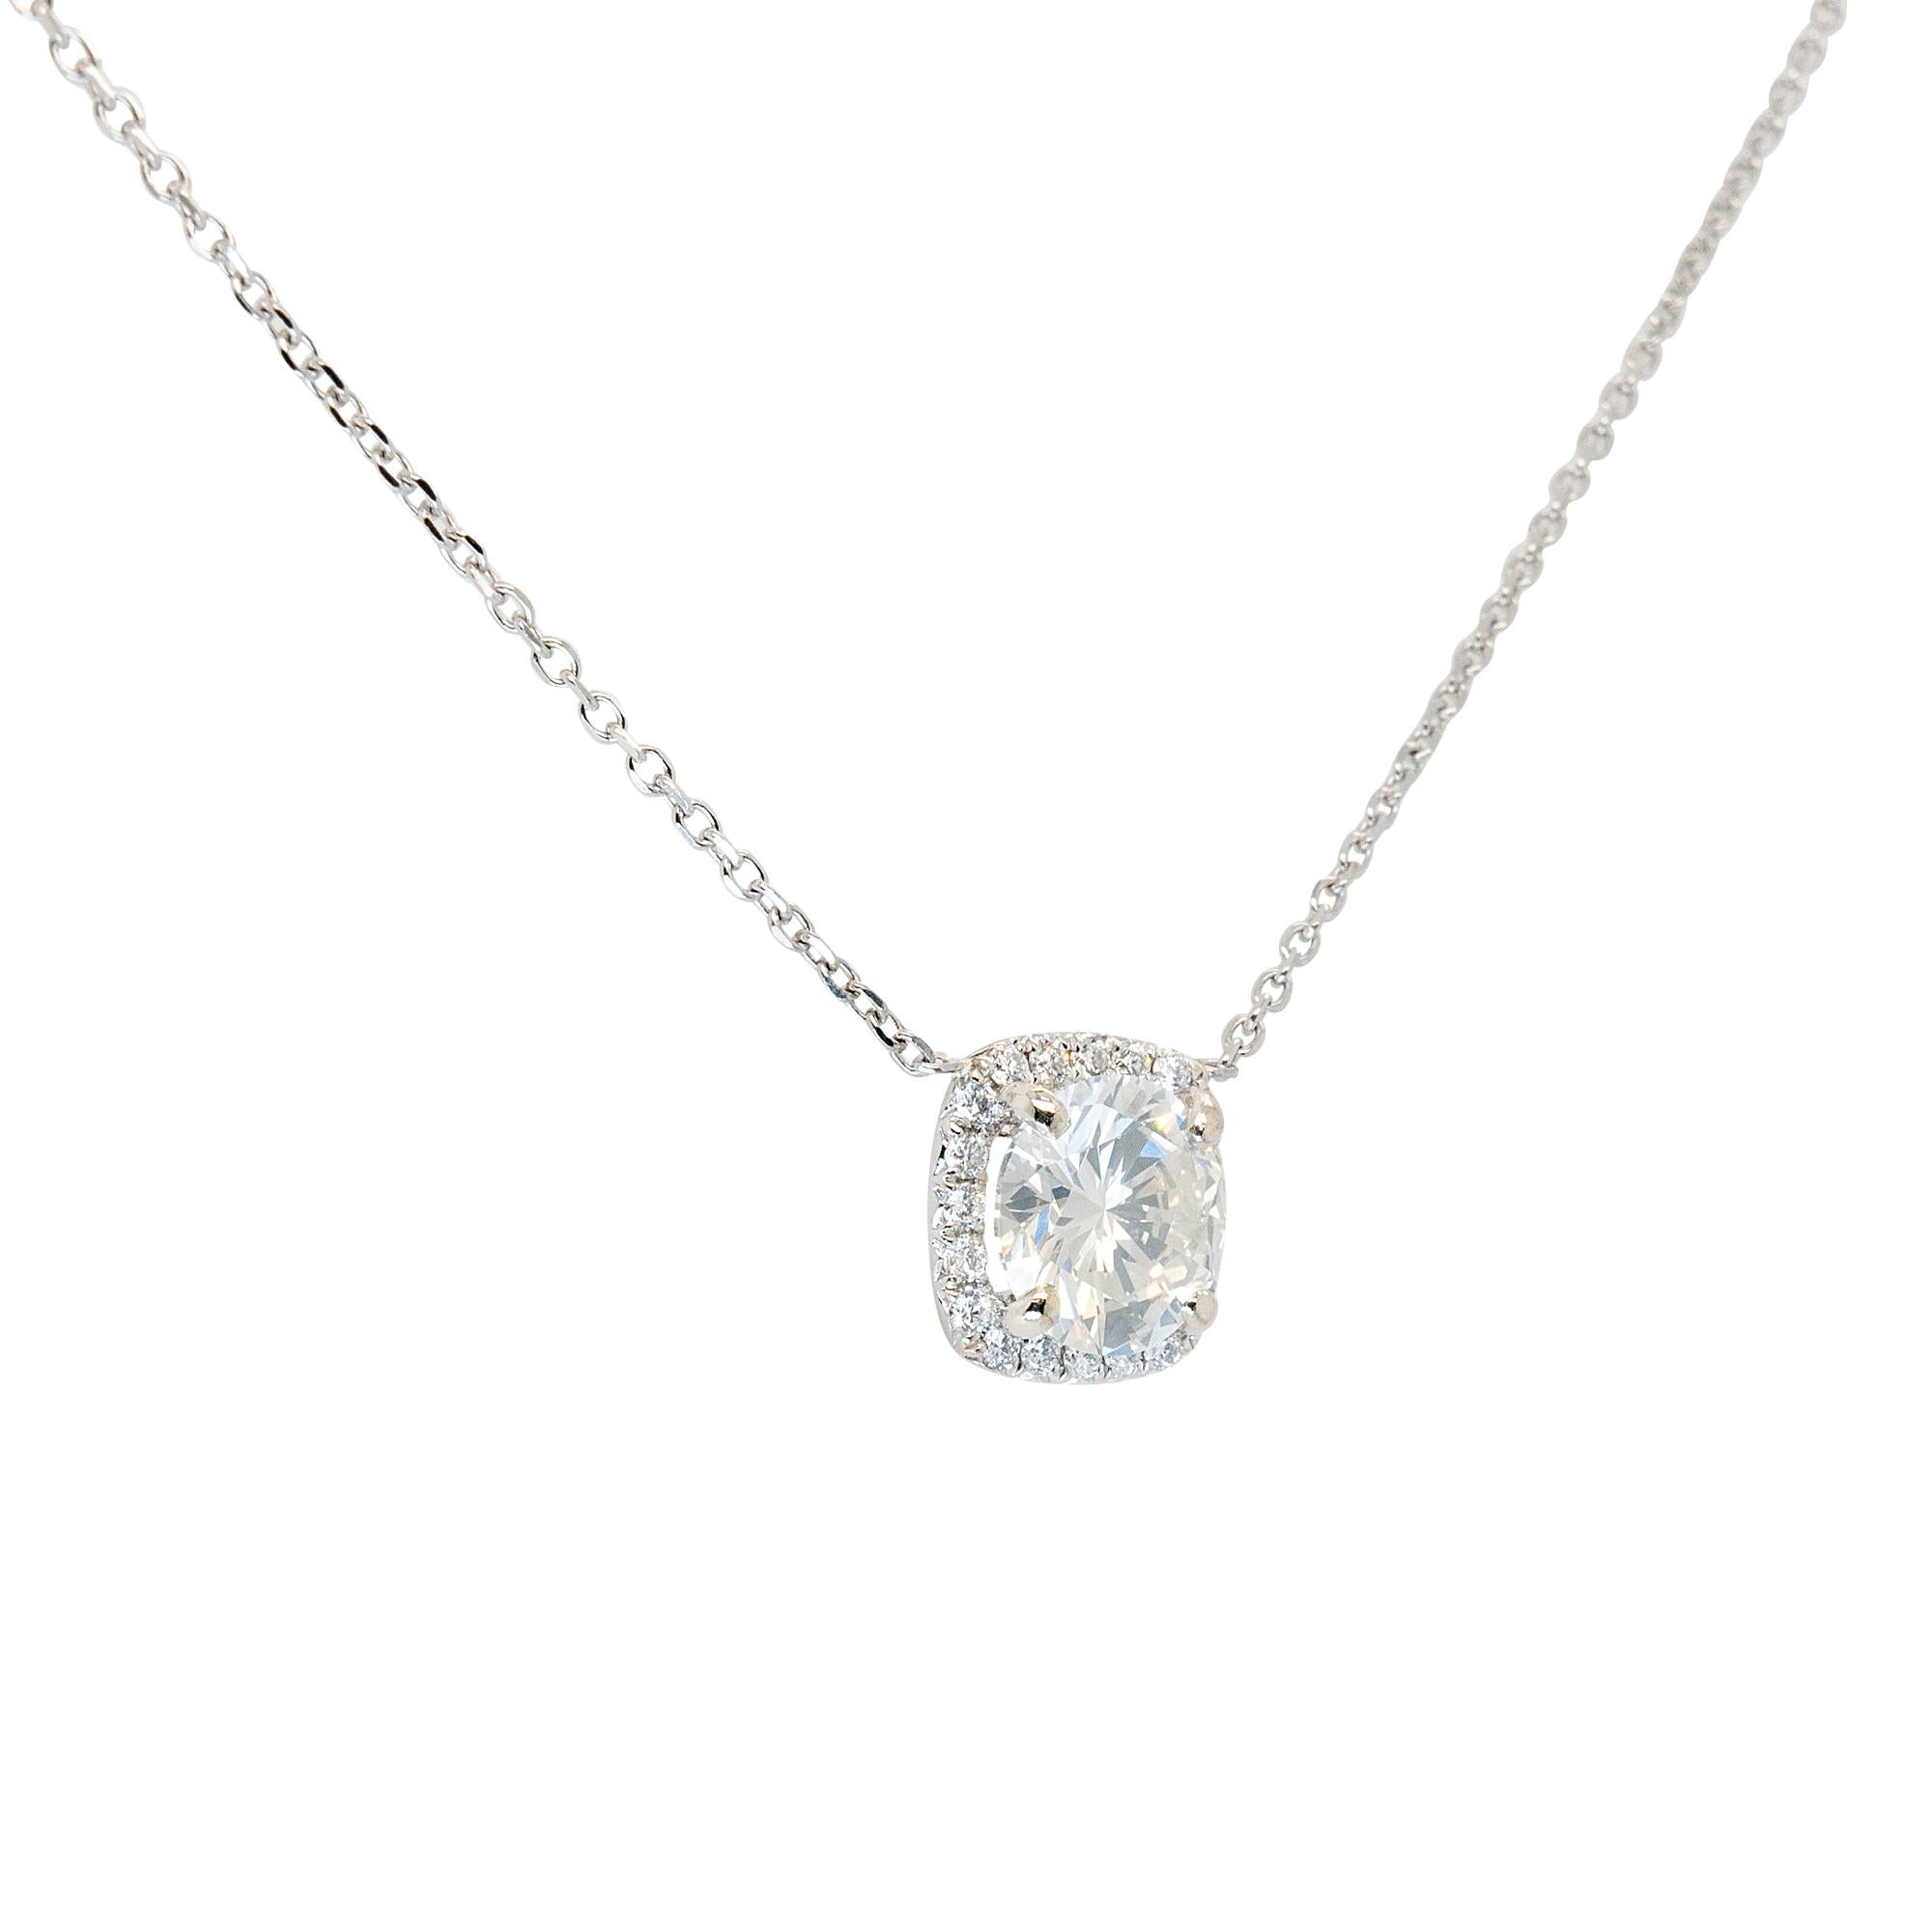 Pendant Details:
1.50ctw Round Brilliant Natural Diamond
Is I Color and SI1 Clarity
GIA #5201093674
7.3mm x 9.0mmx 4.3mm
Chain Details: 14k White Gold 1.00mm Wheat Chain
Chain Size: 17